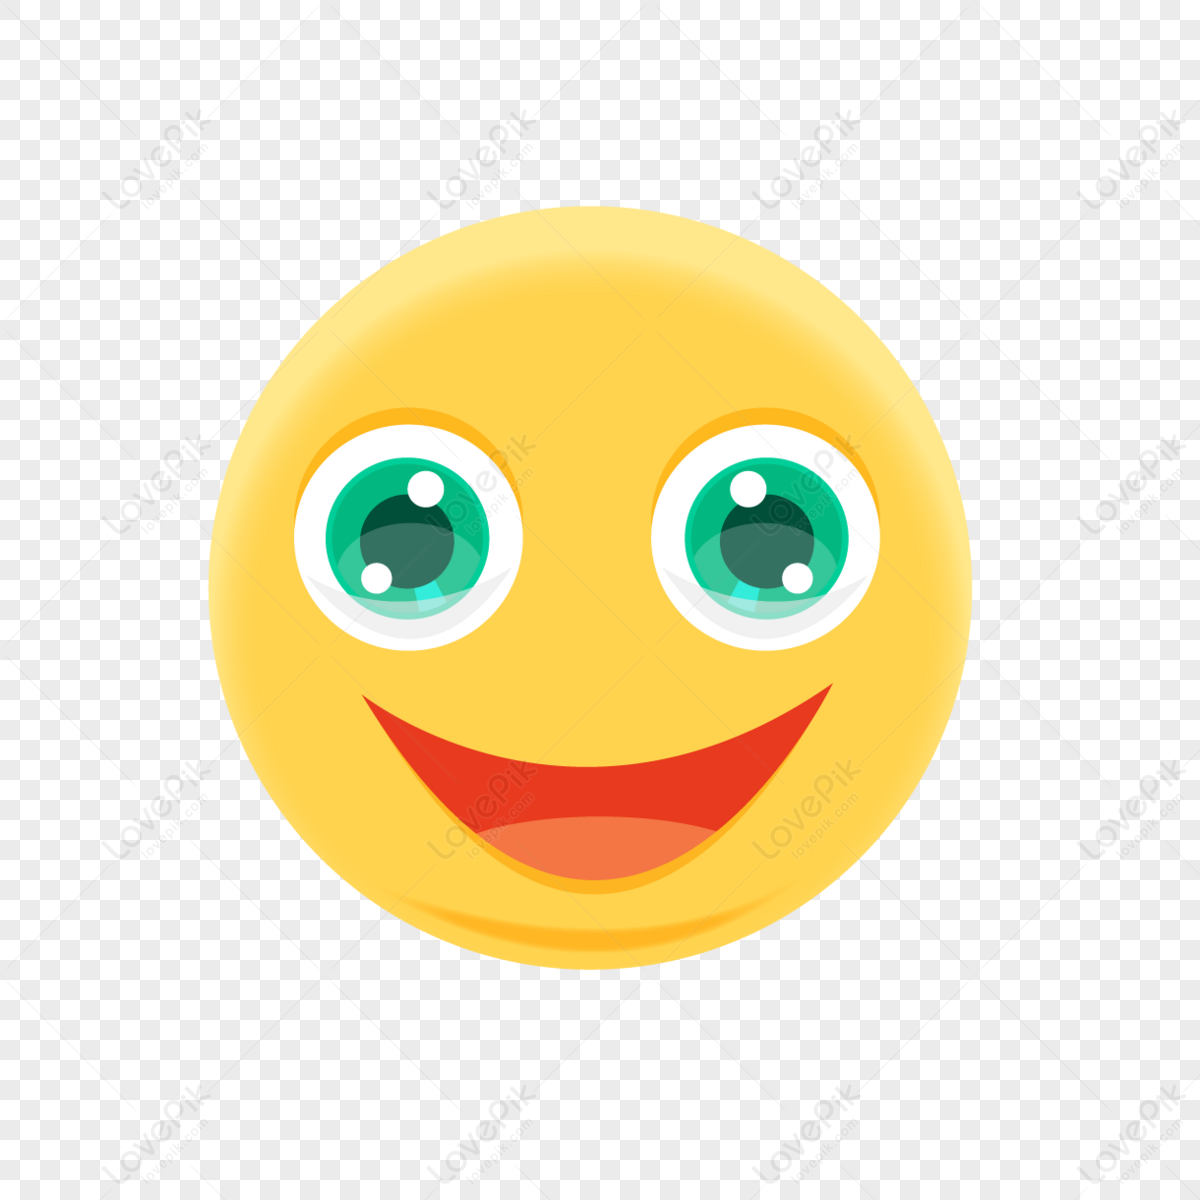 But Still Want To Keep Smiling PNG Images With Transparent Background ...